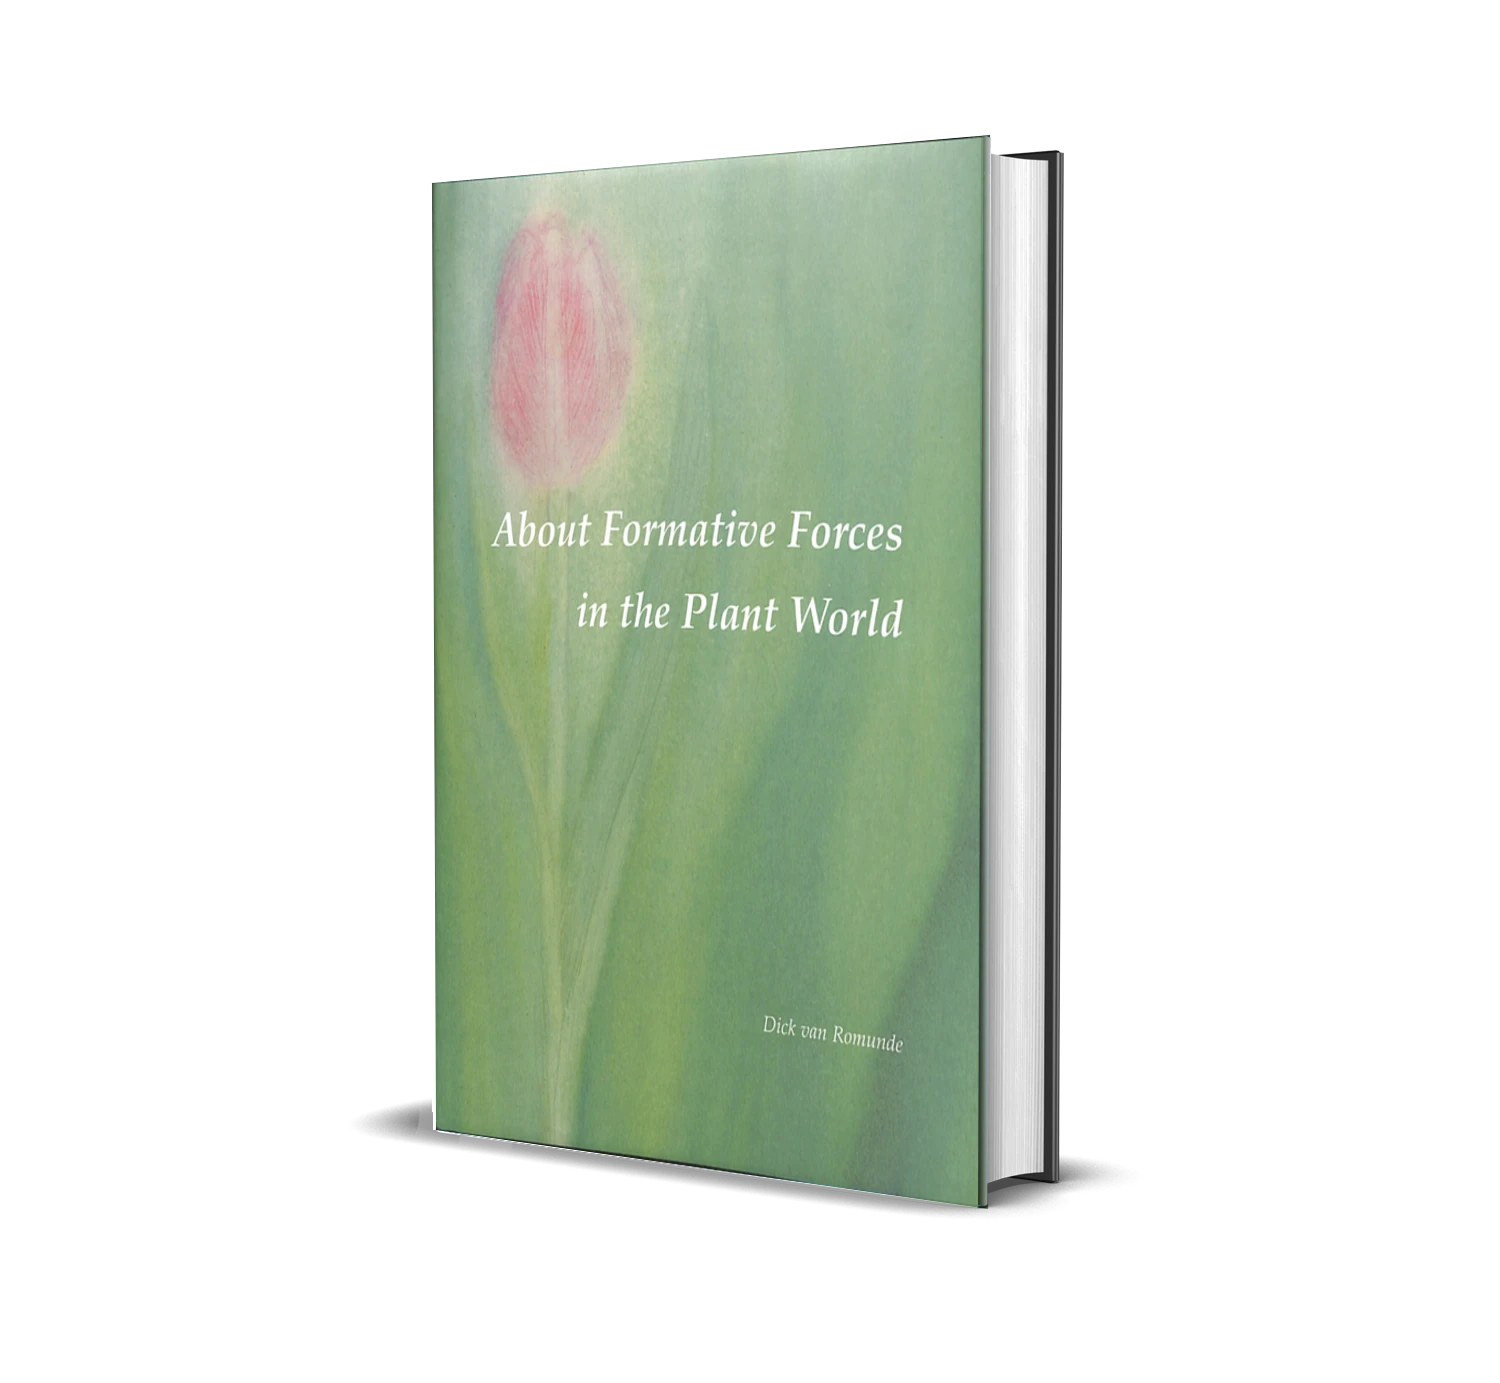 Formative Forces in the Plant World